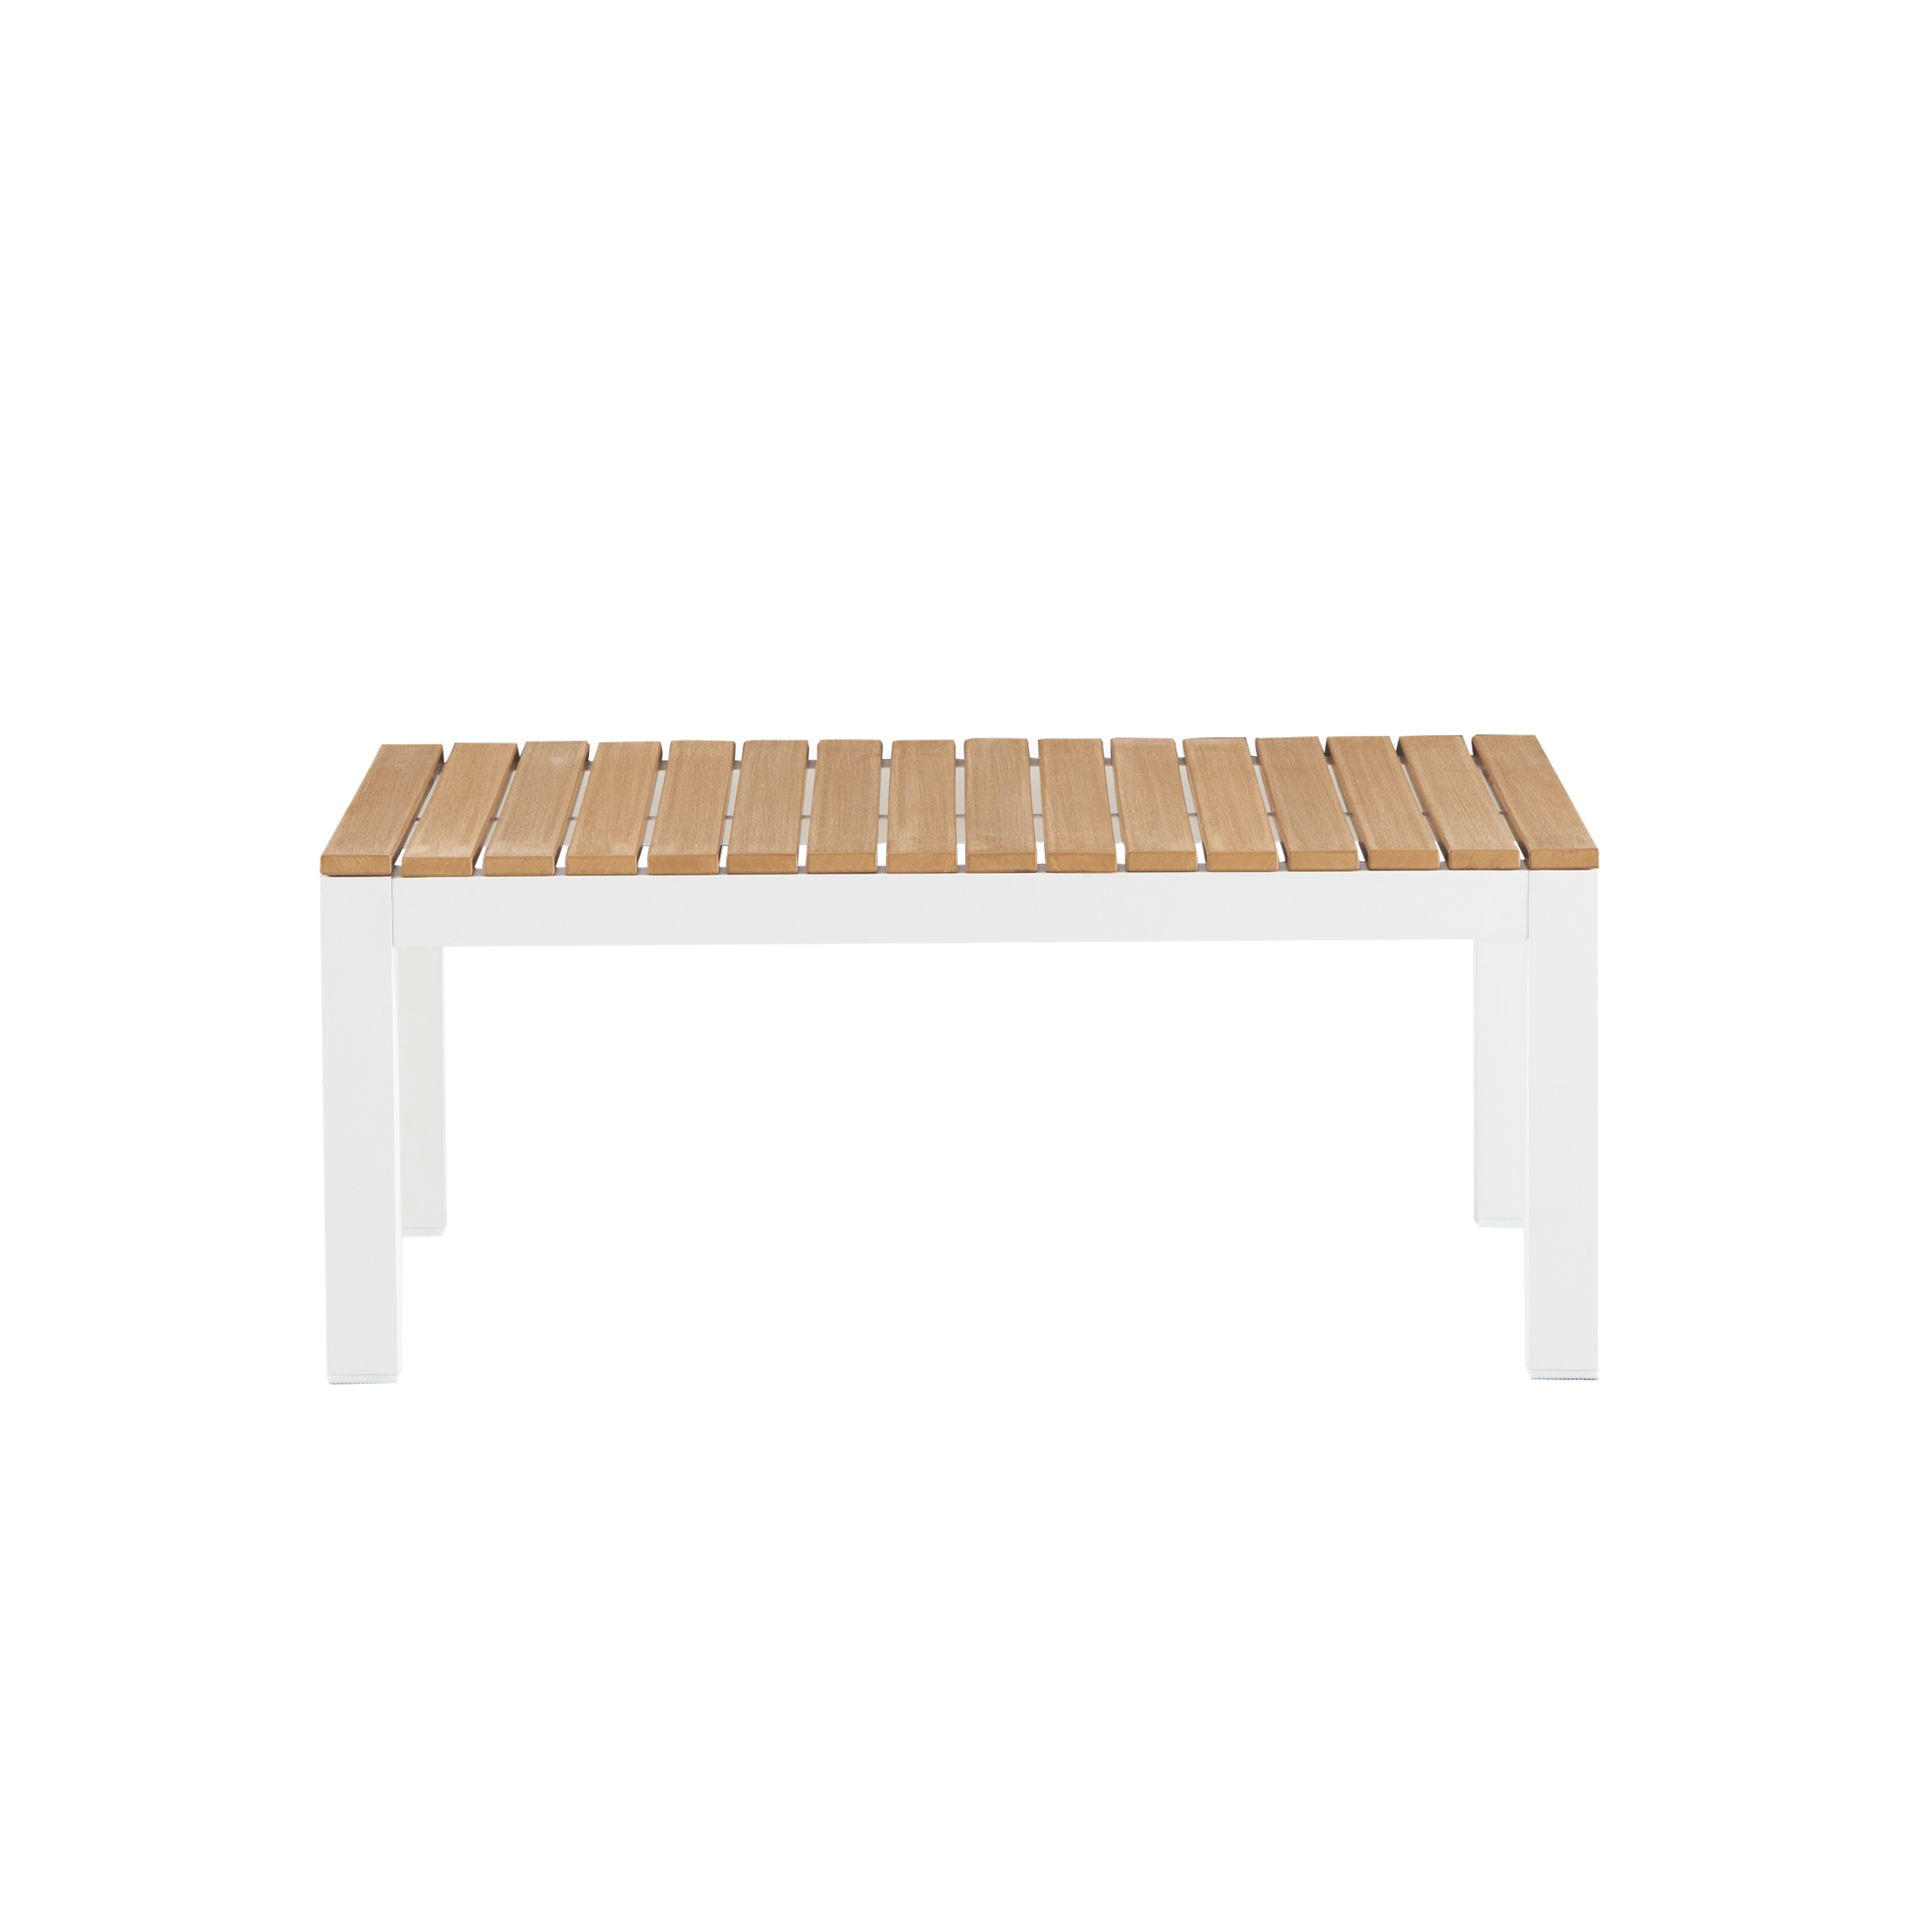 Snow white coffee table (Poly wood) S2